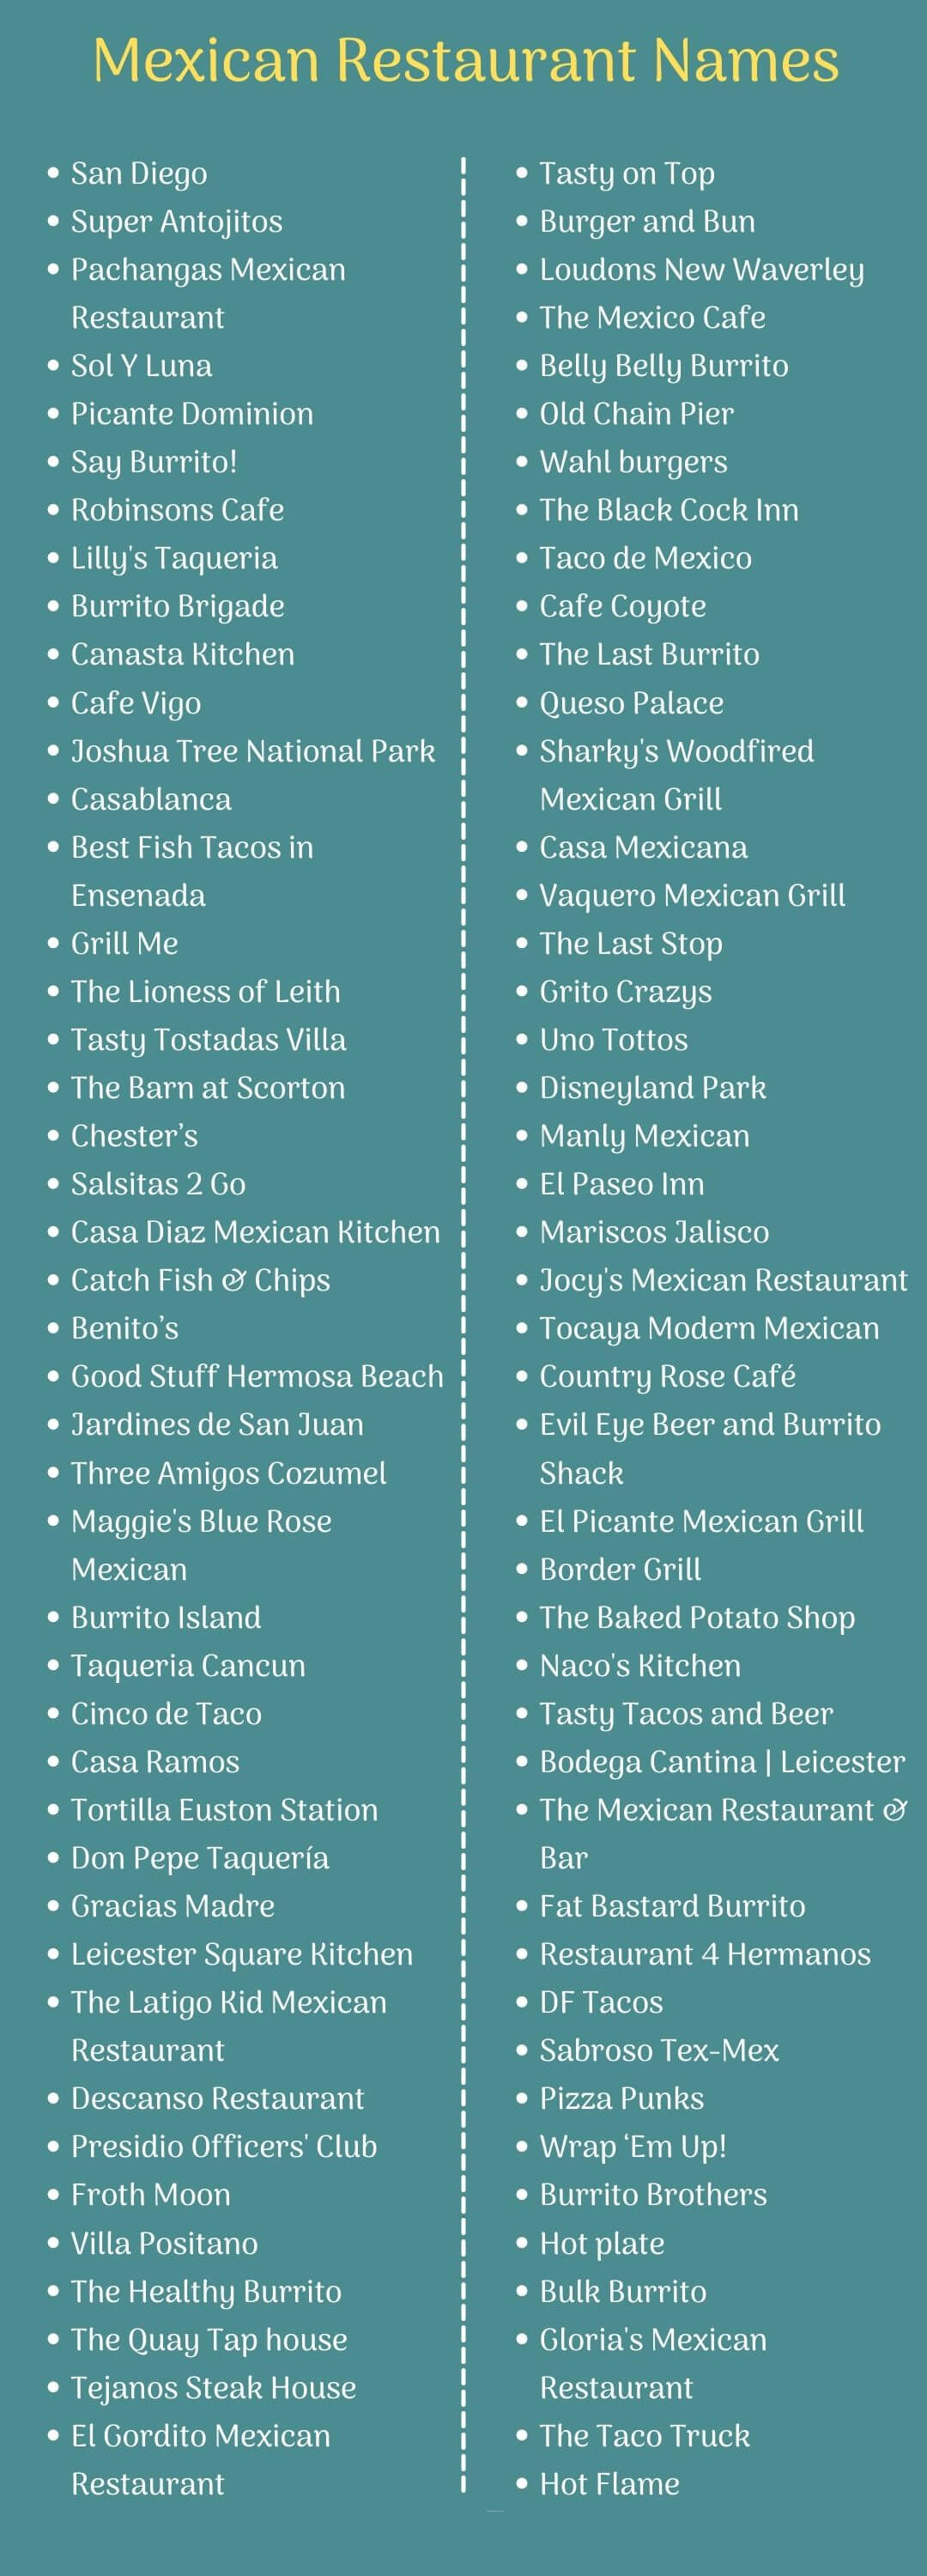 Mexican Restaurant Names: Infographic 